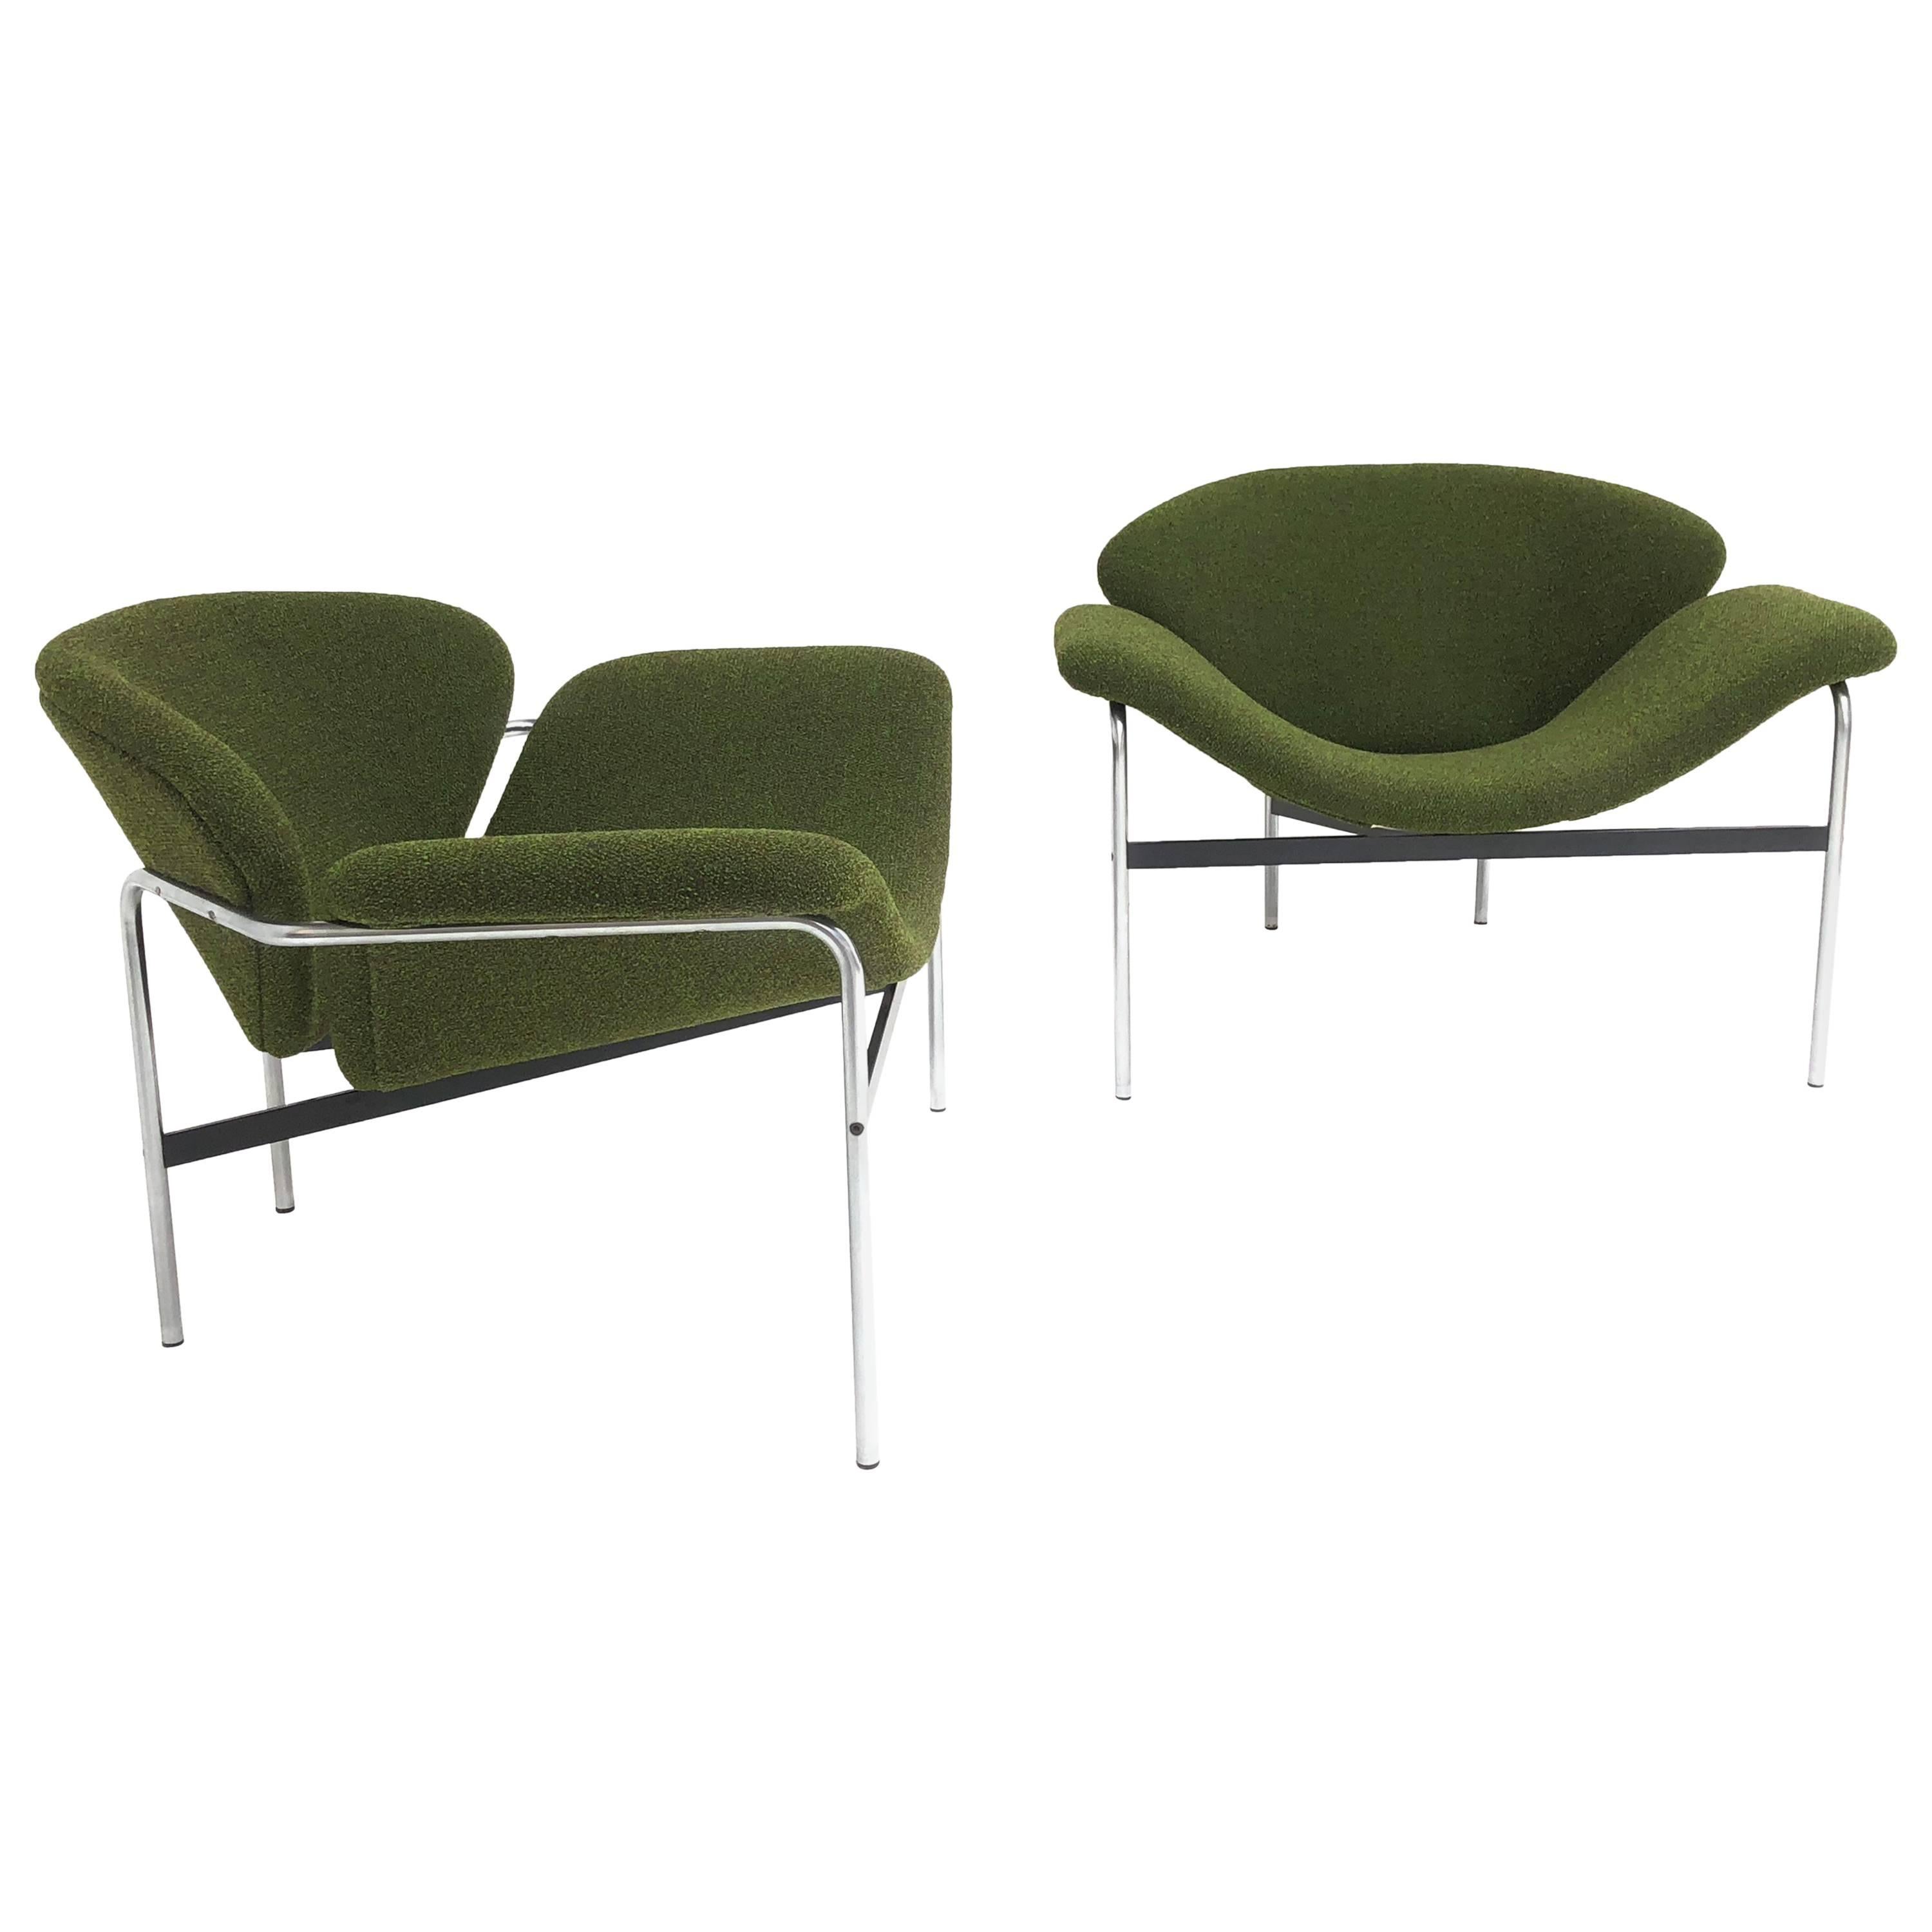 Rare Pair of 1960s Dutch 'Groovy' Lounge Chairs Attributed to Gelderland